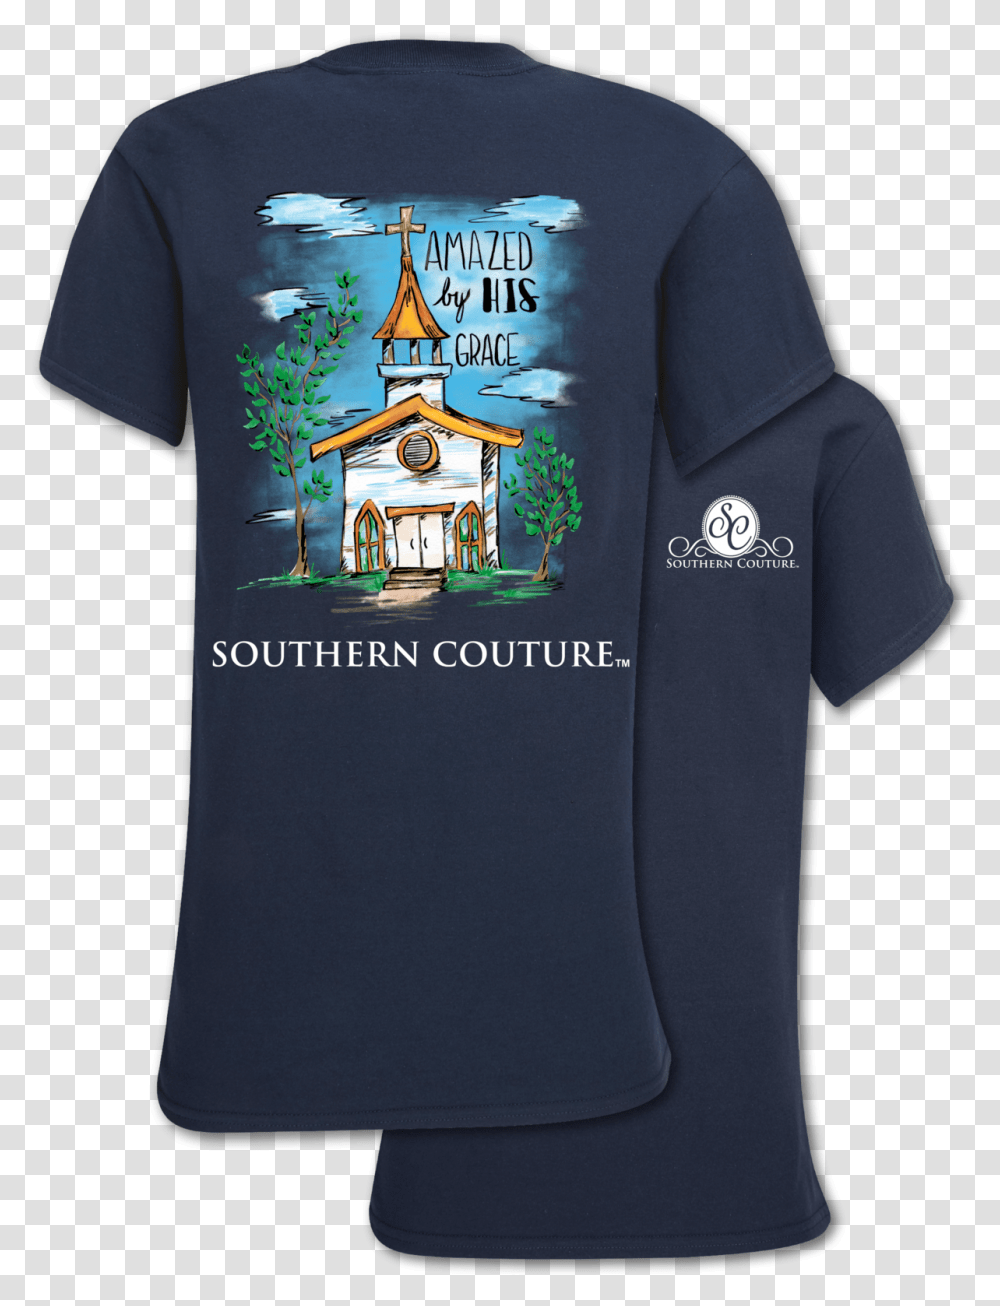 Sc Classic Amazed By His Grace Southern Couture, Apparel, T-Shirt, Sleeve Transparent Png